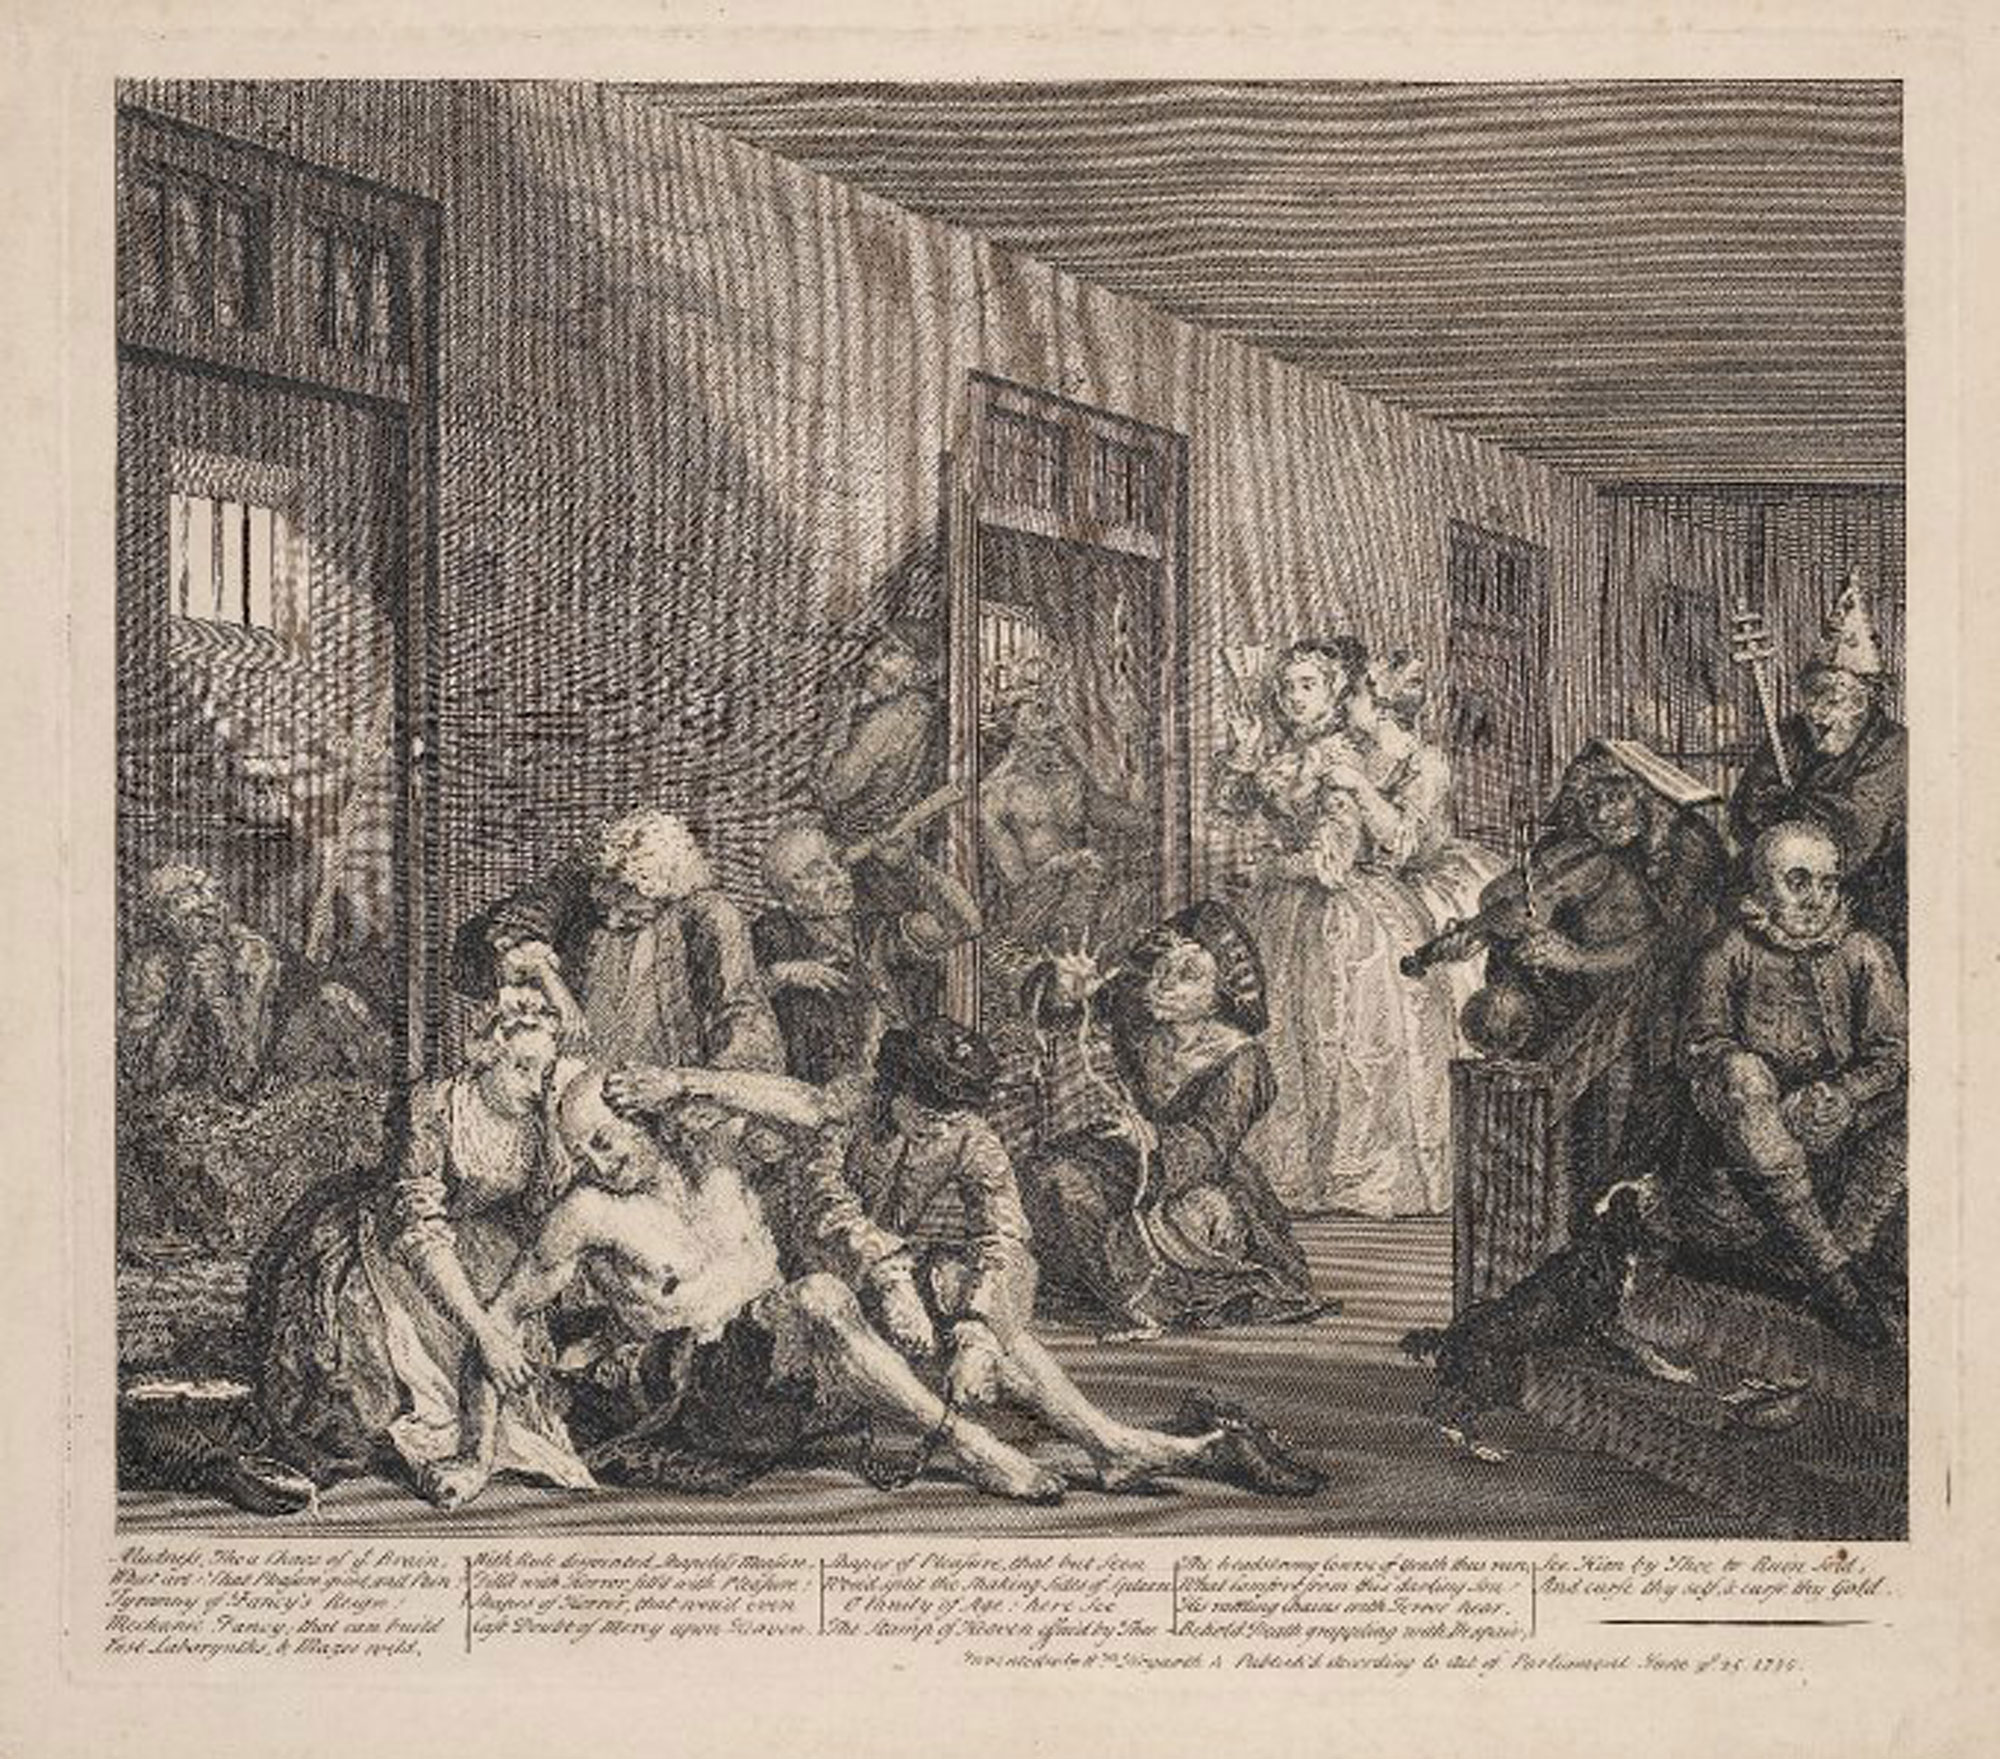 This engraving from 1735 shows aristocratic women in fancy dresses and hats watching patients in Bedlam. One patient is nearly naked and in chains. One patient is shown on a bed, praying. Overall the mood is dispairing.